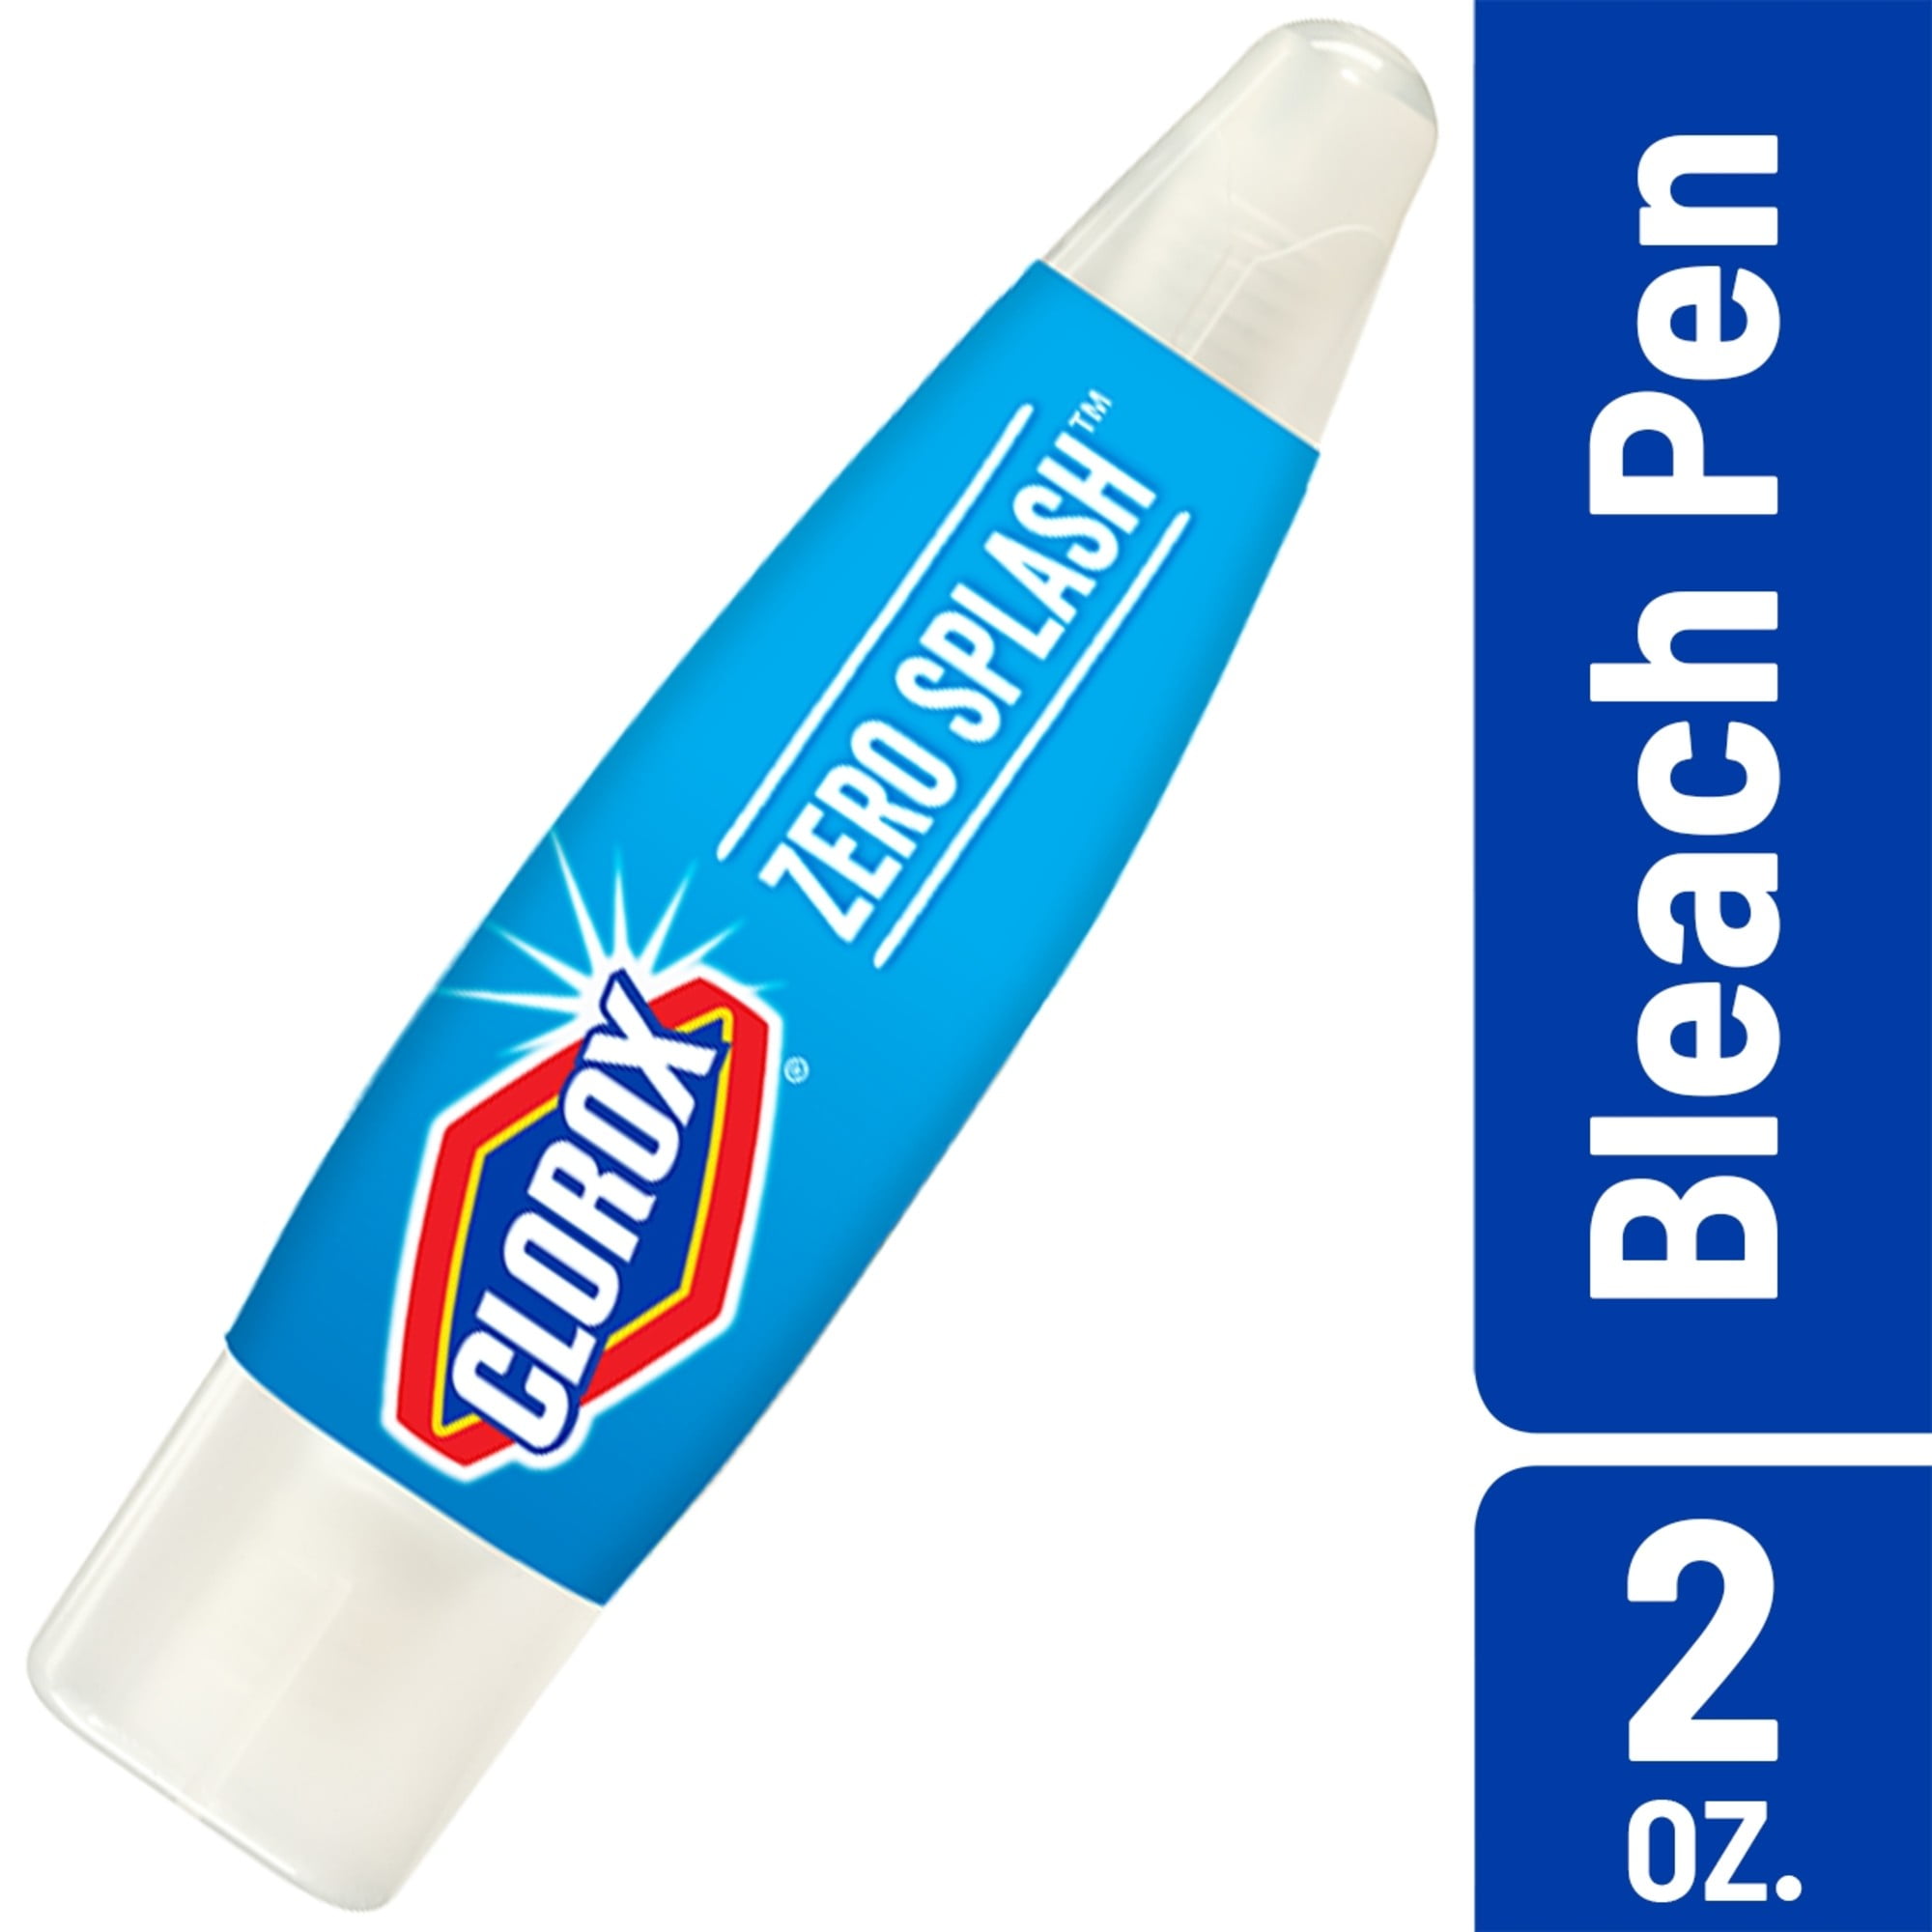 What is going on with the price of Clorox bleach pens?! : r/CleaningTips